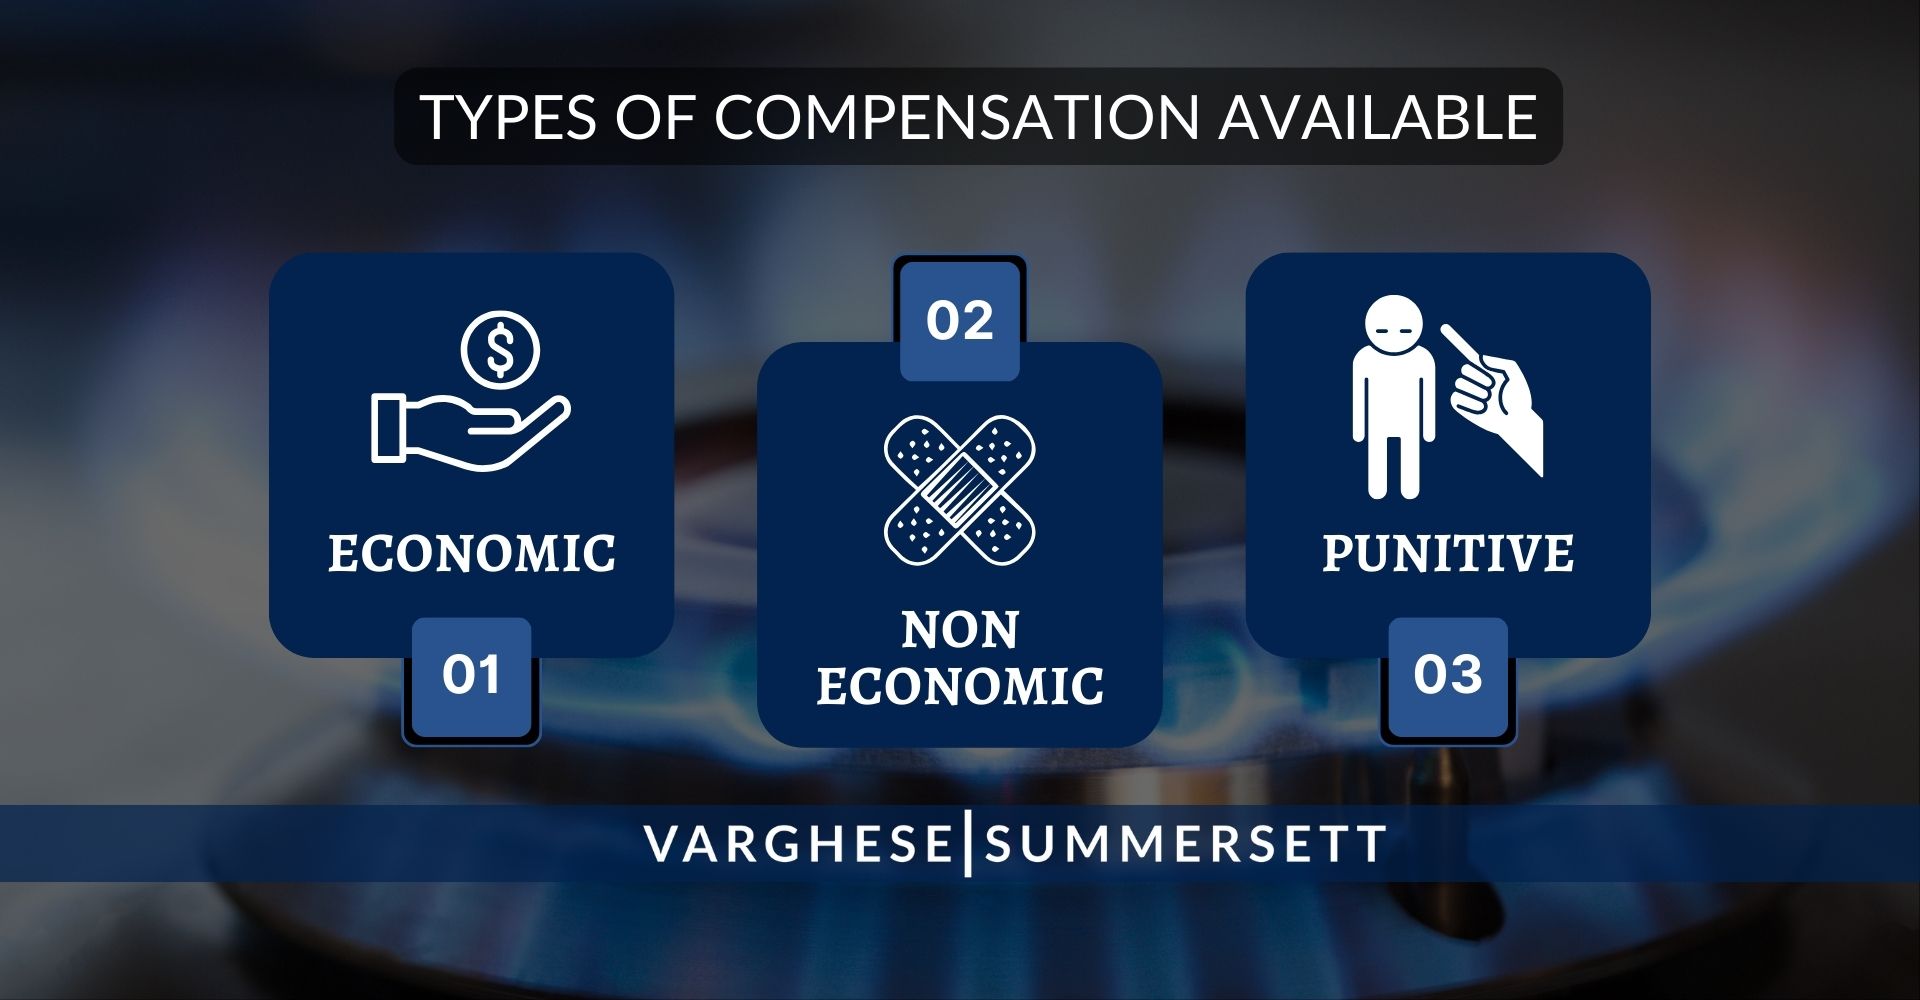 Types of Compensation Available